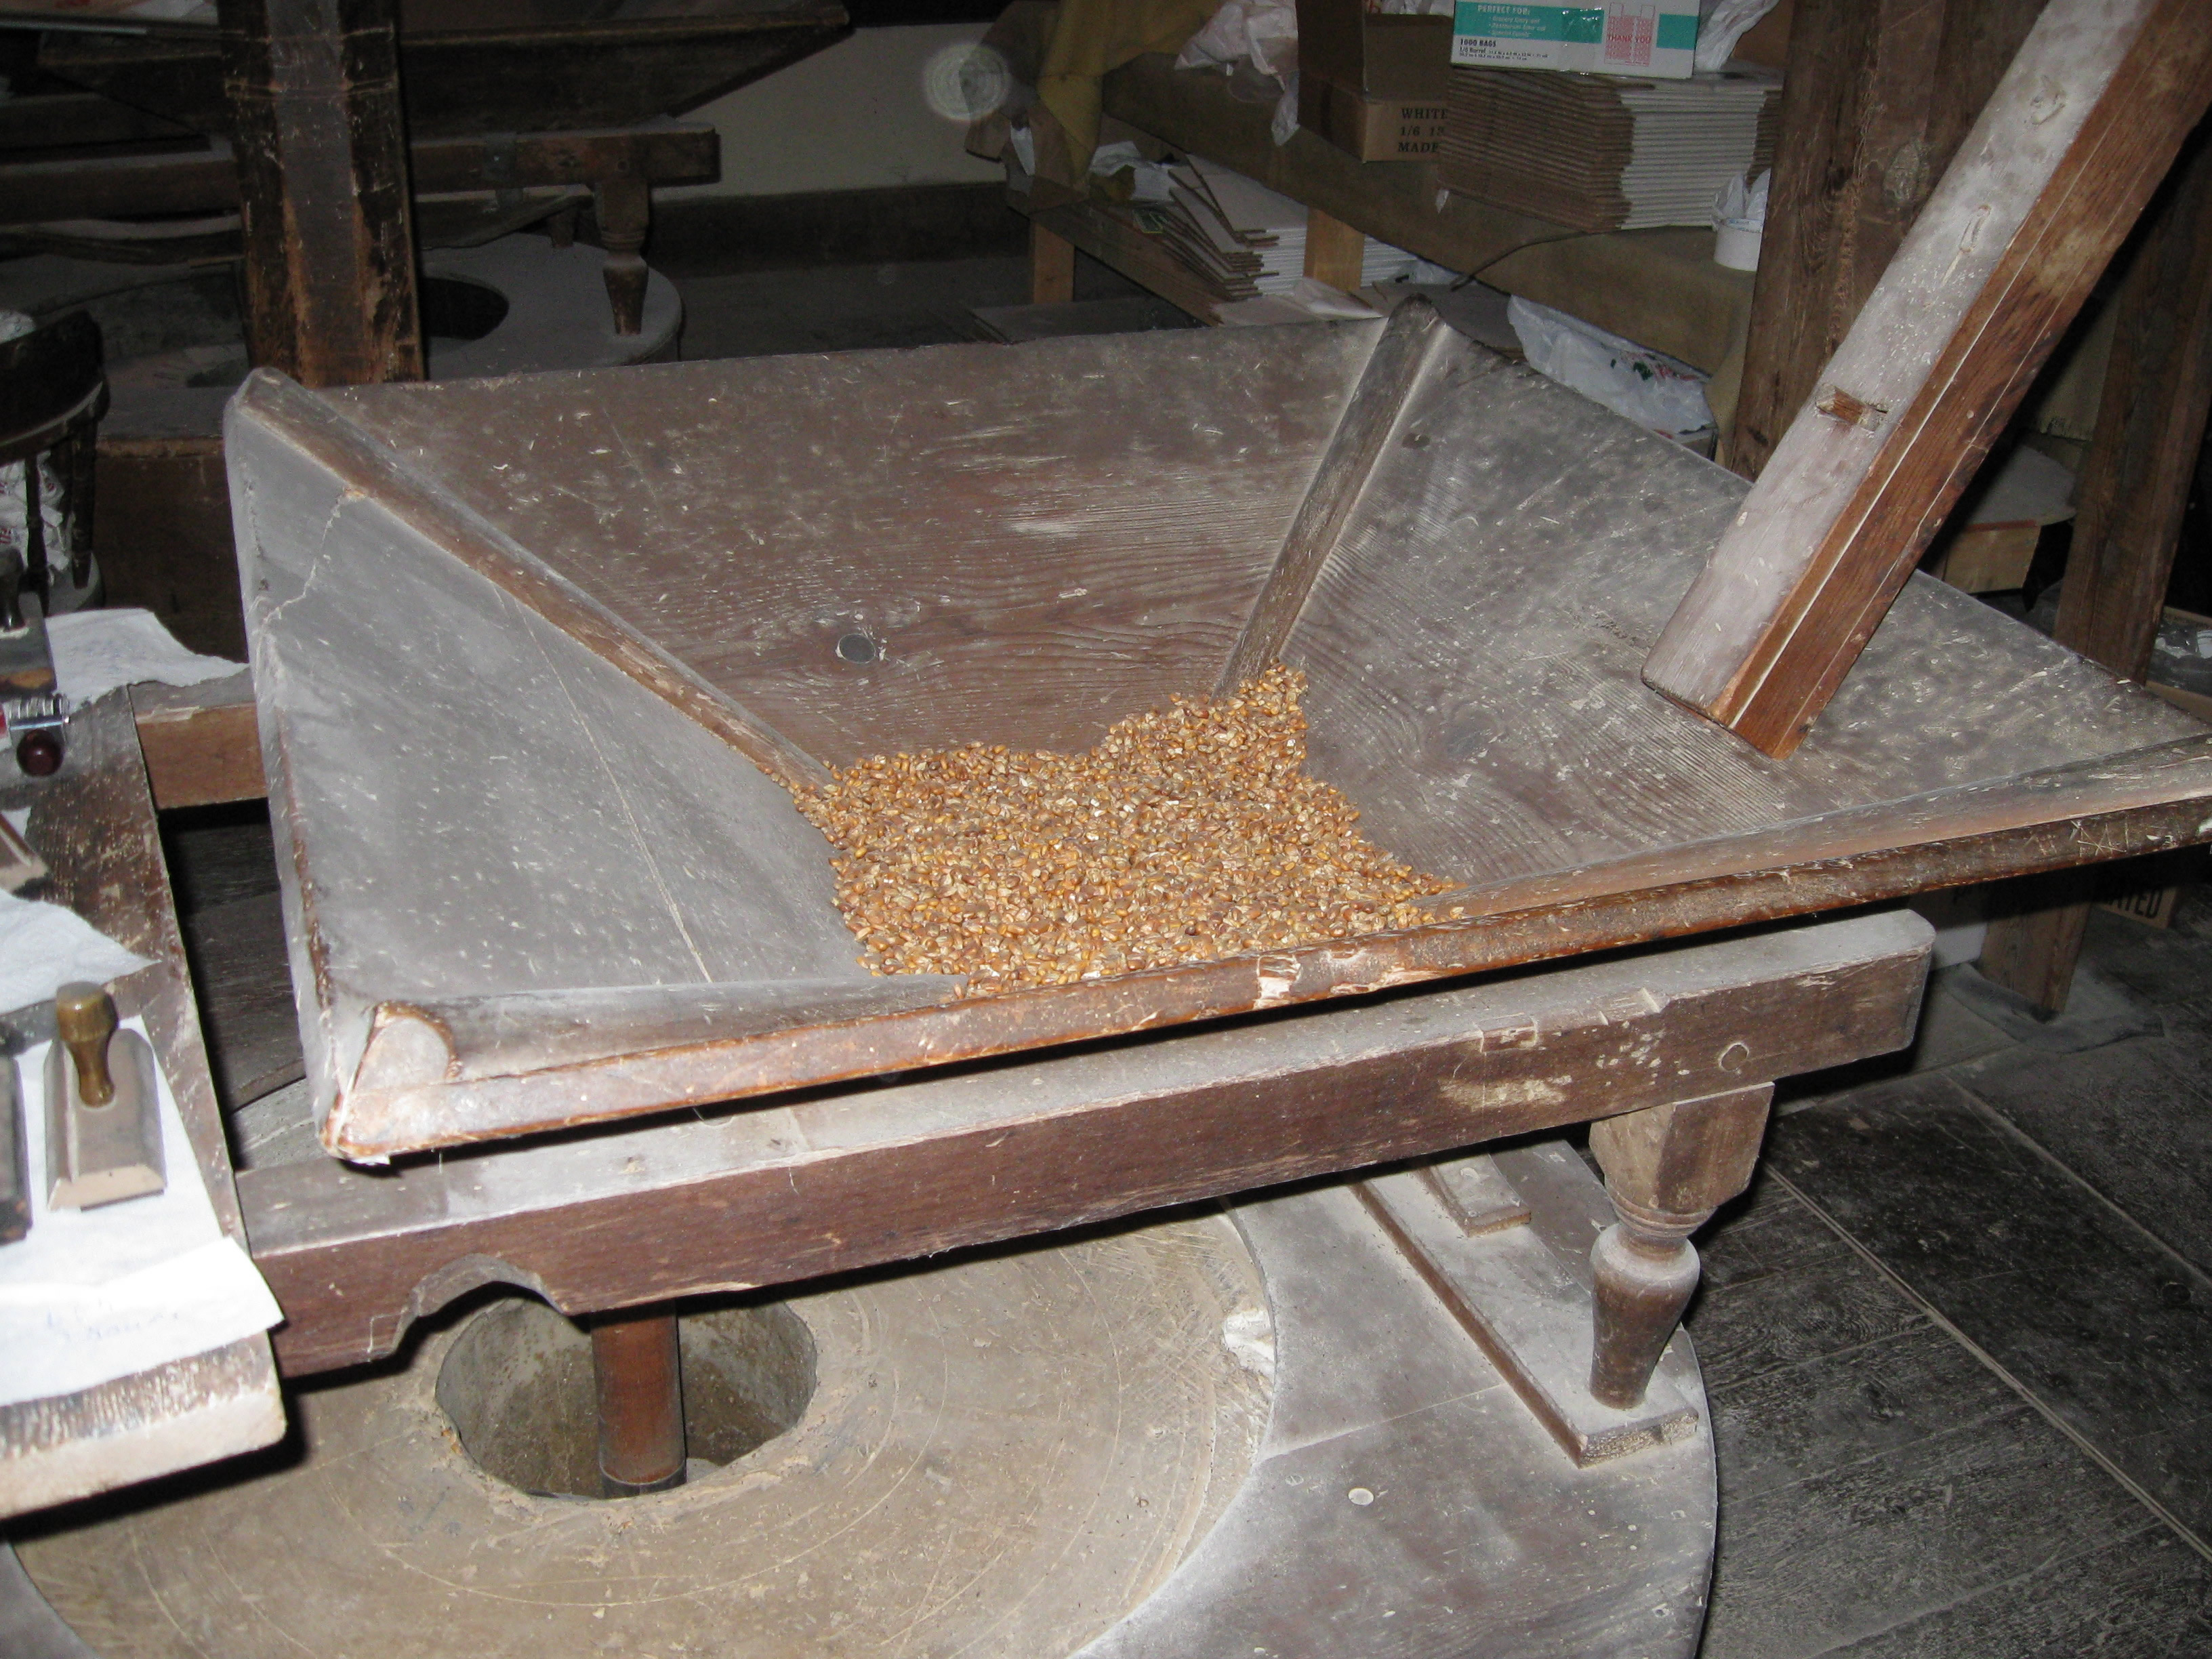 Grain about to the ground at Burnt Cabins Grist Mill